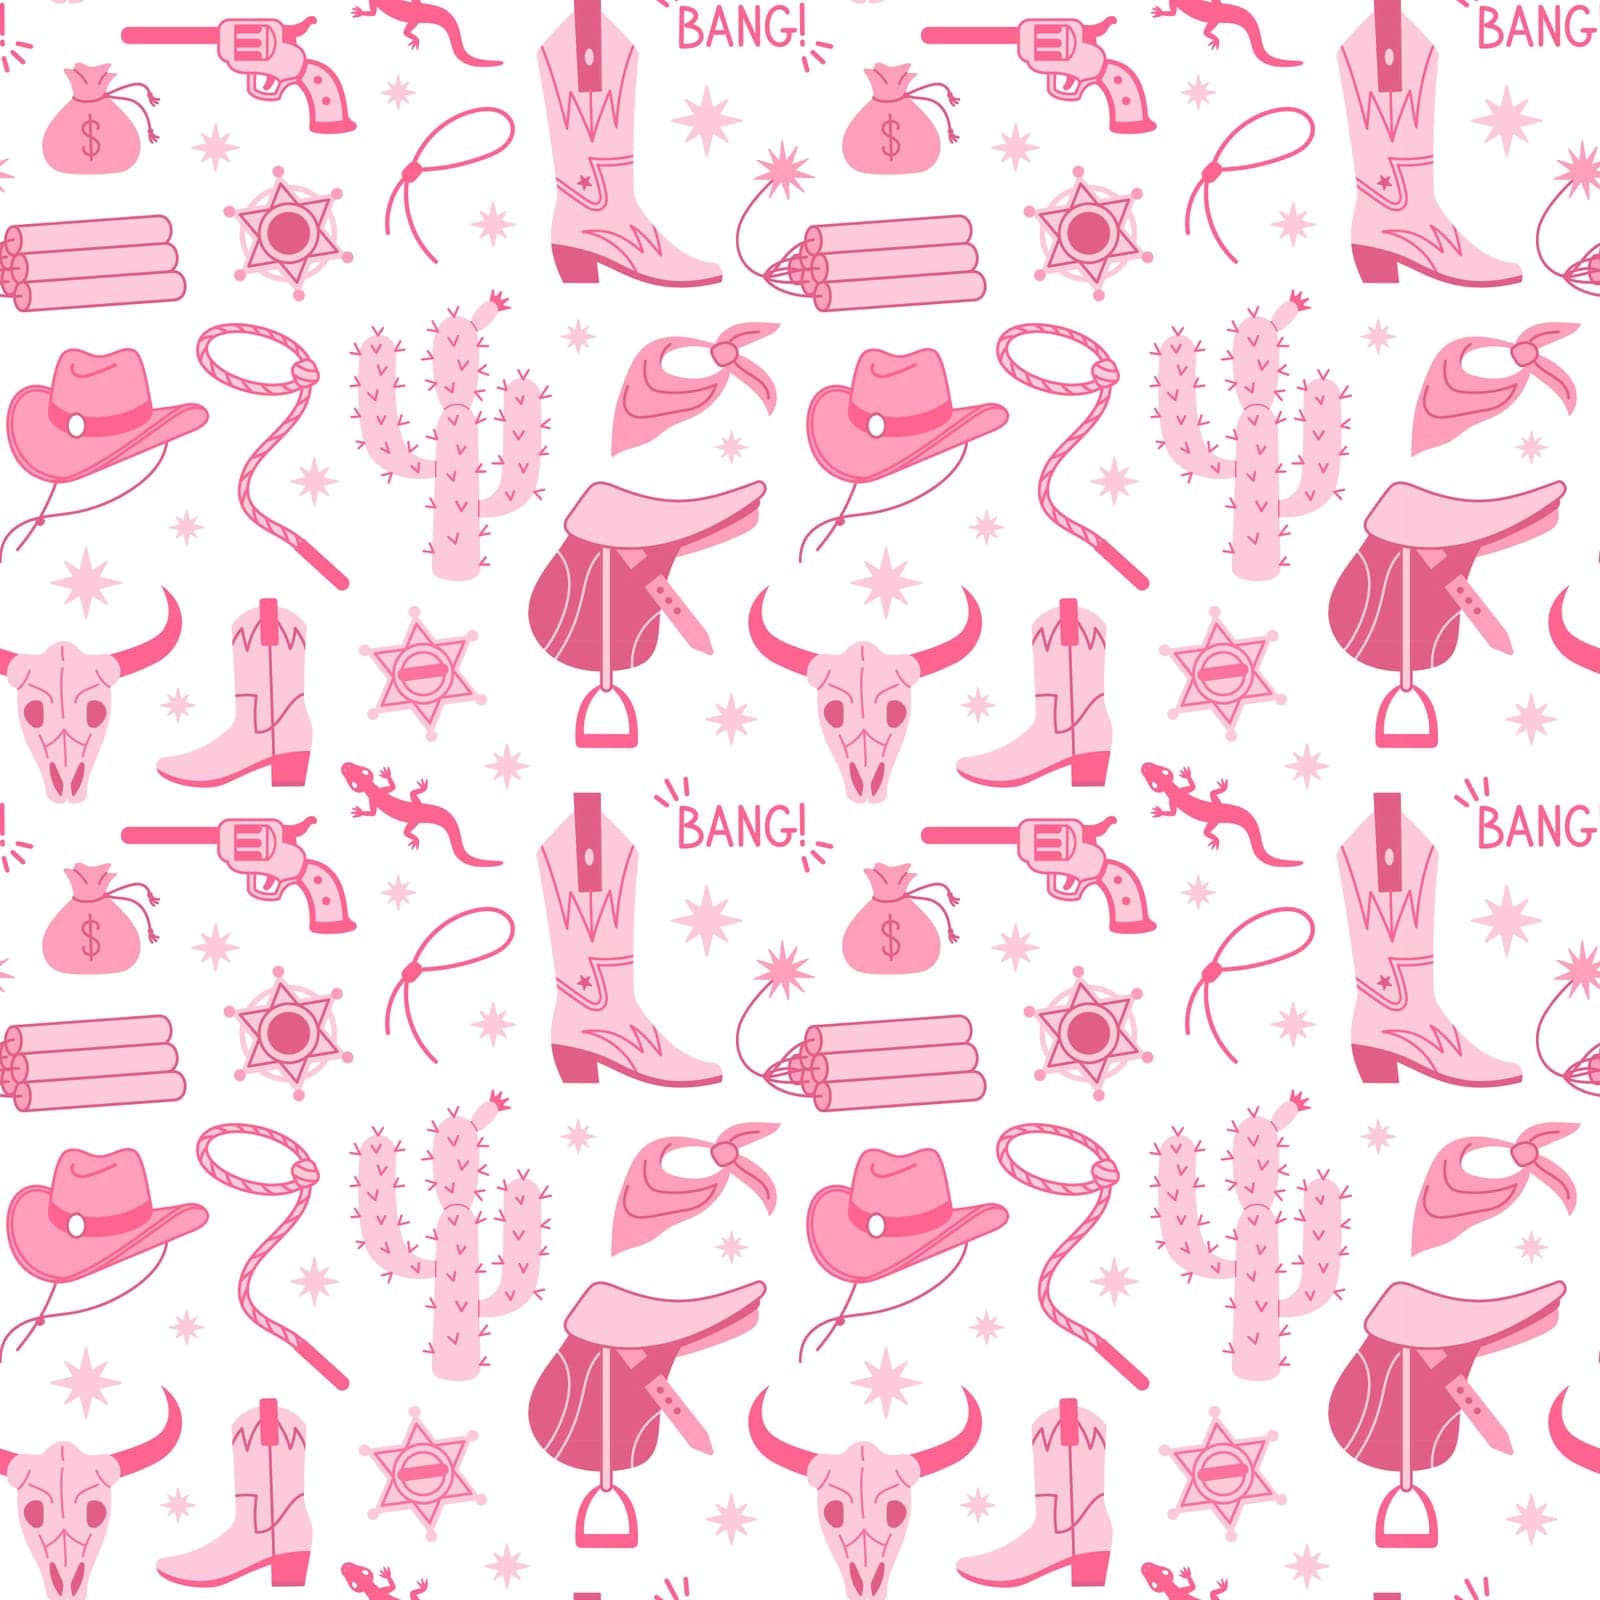 Cowboy Pink core fashion seamless pattern. Cowgirl boots, hat, cactus and lettering. Cowboy western and wild west theme texture. Hand drawn vector illustration. Doodle icons fabric.